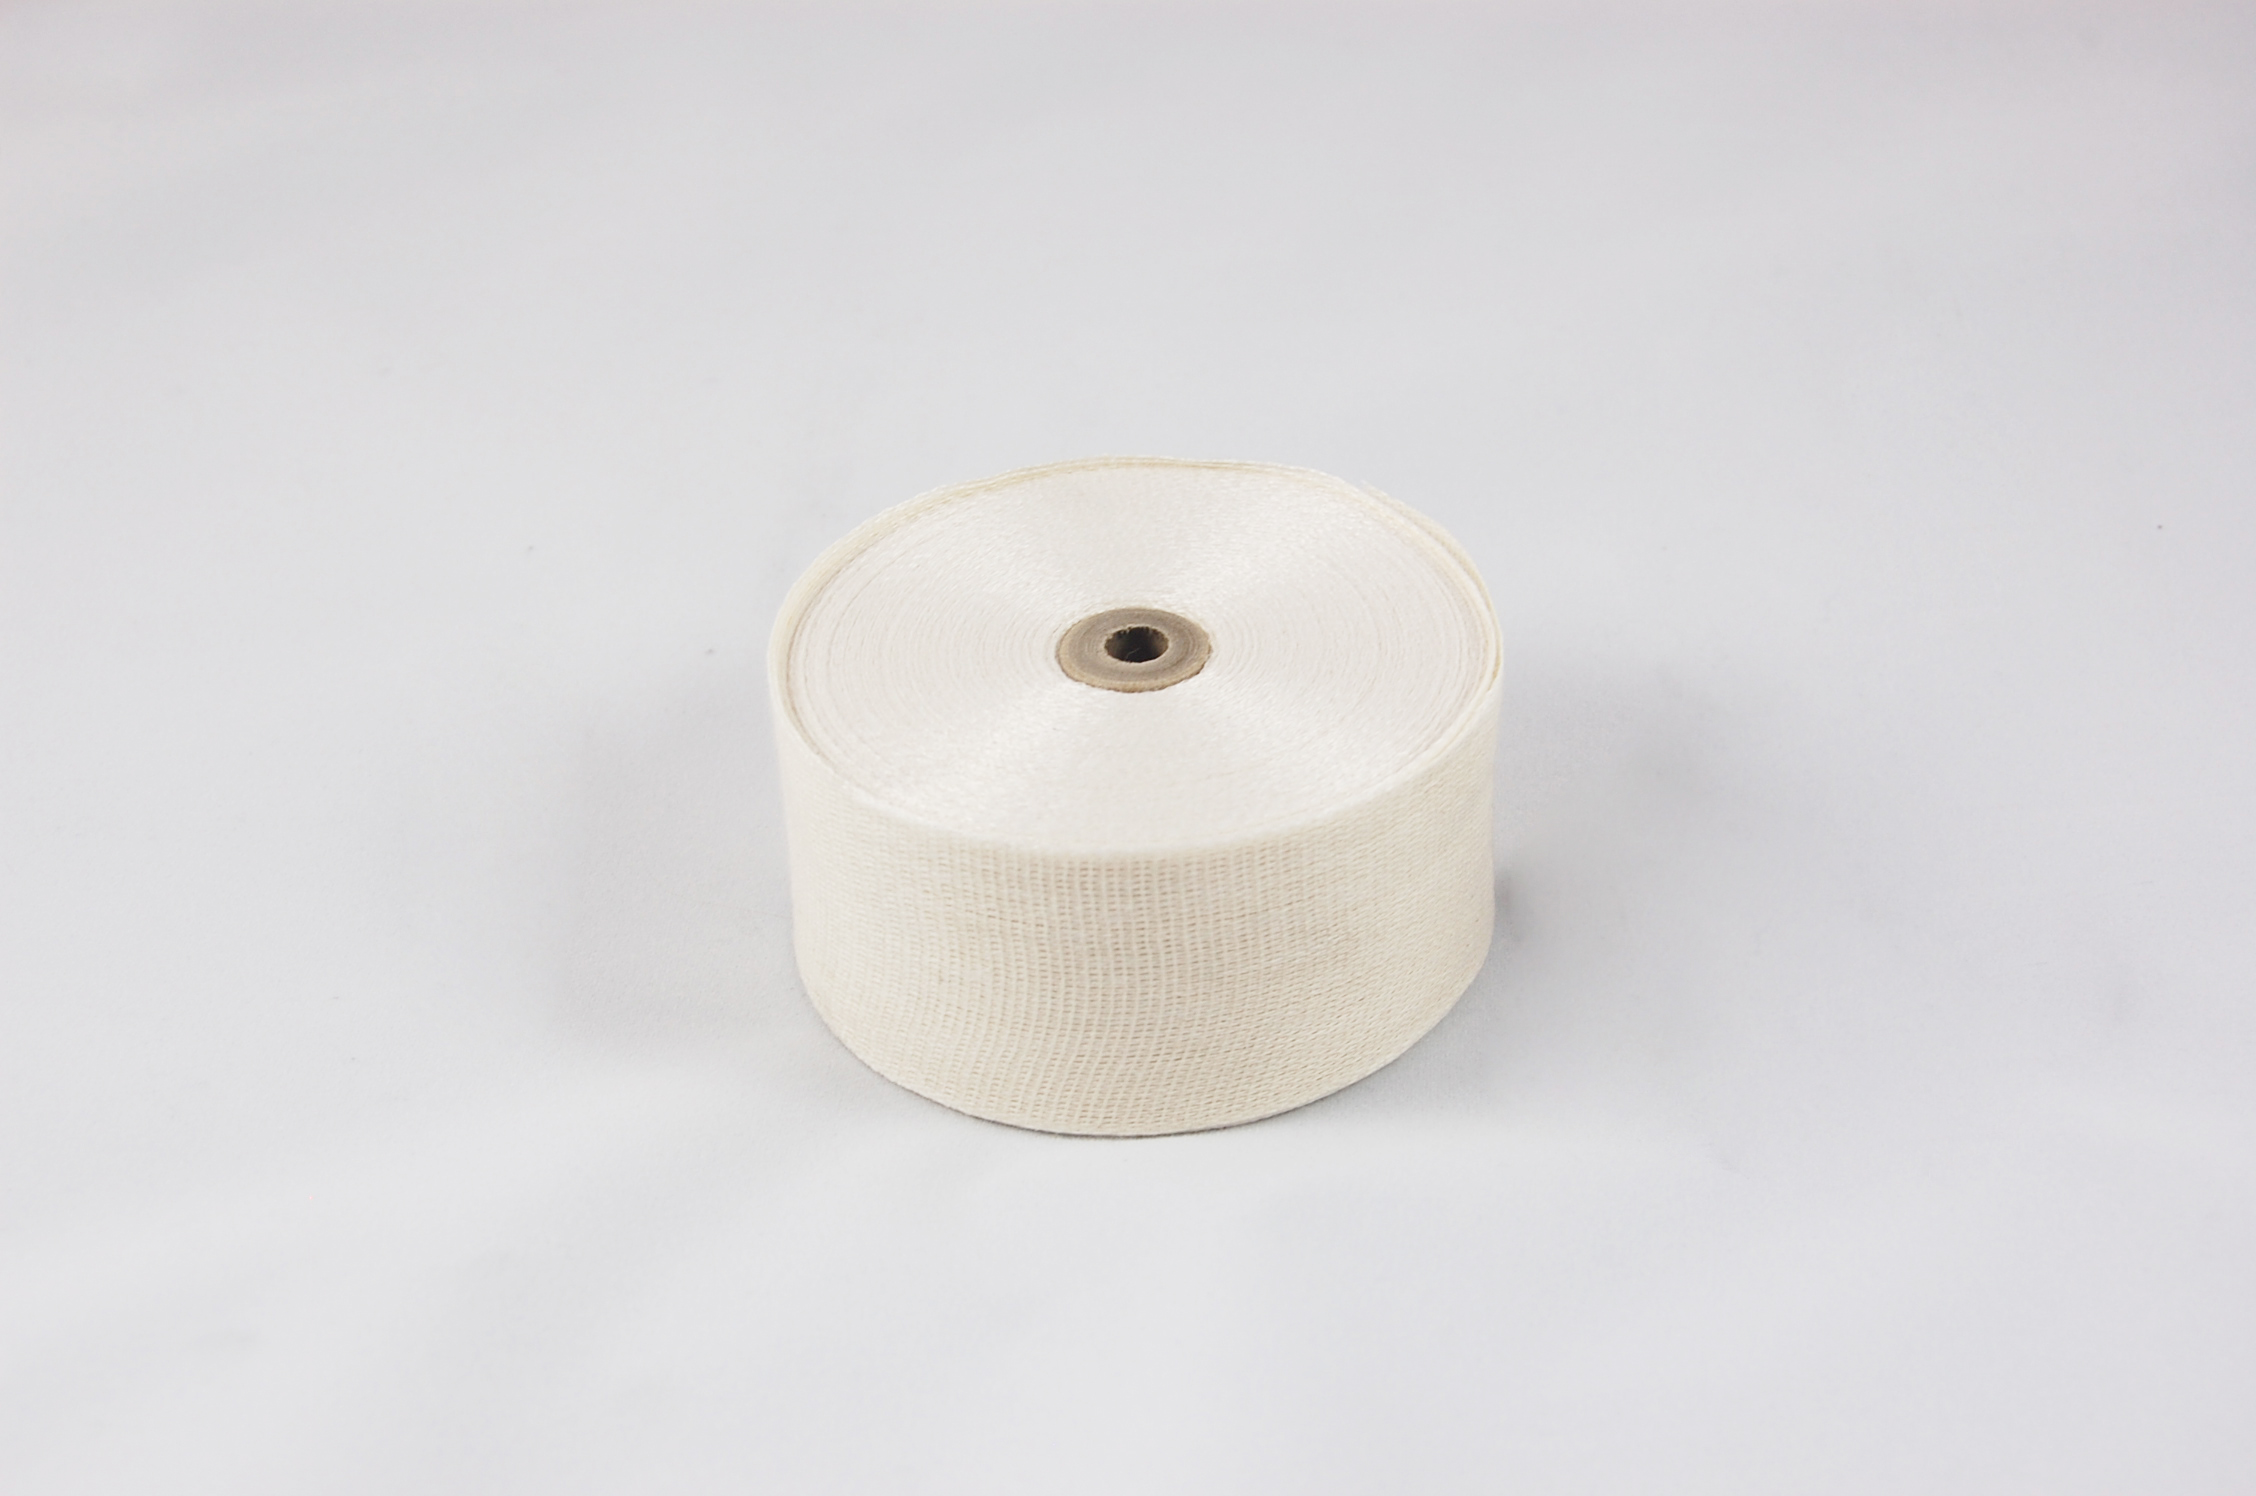 1-1/2" 64212 .007" Woven Cotton Tape (Lightweight) 105°C, natural, 1-1/2" wide x  36 YD roll